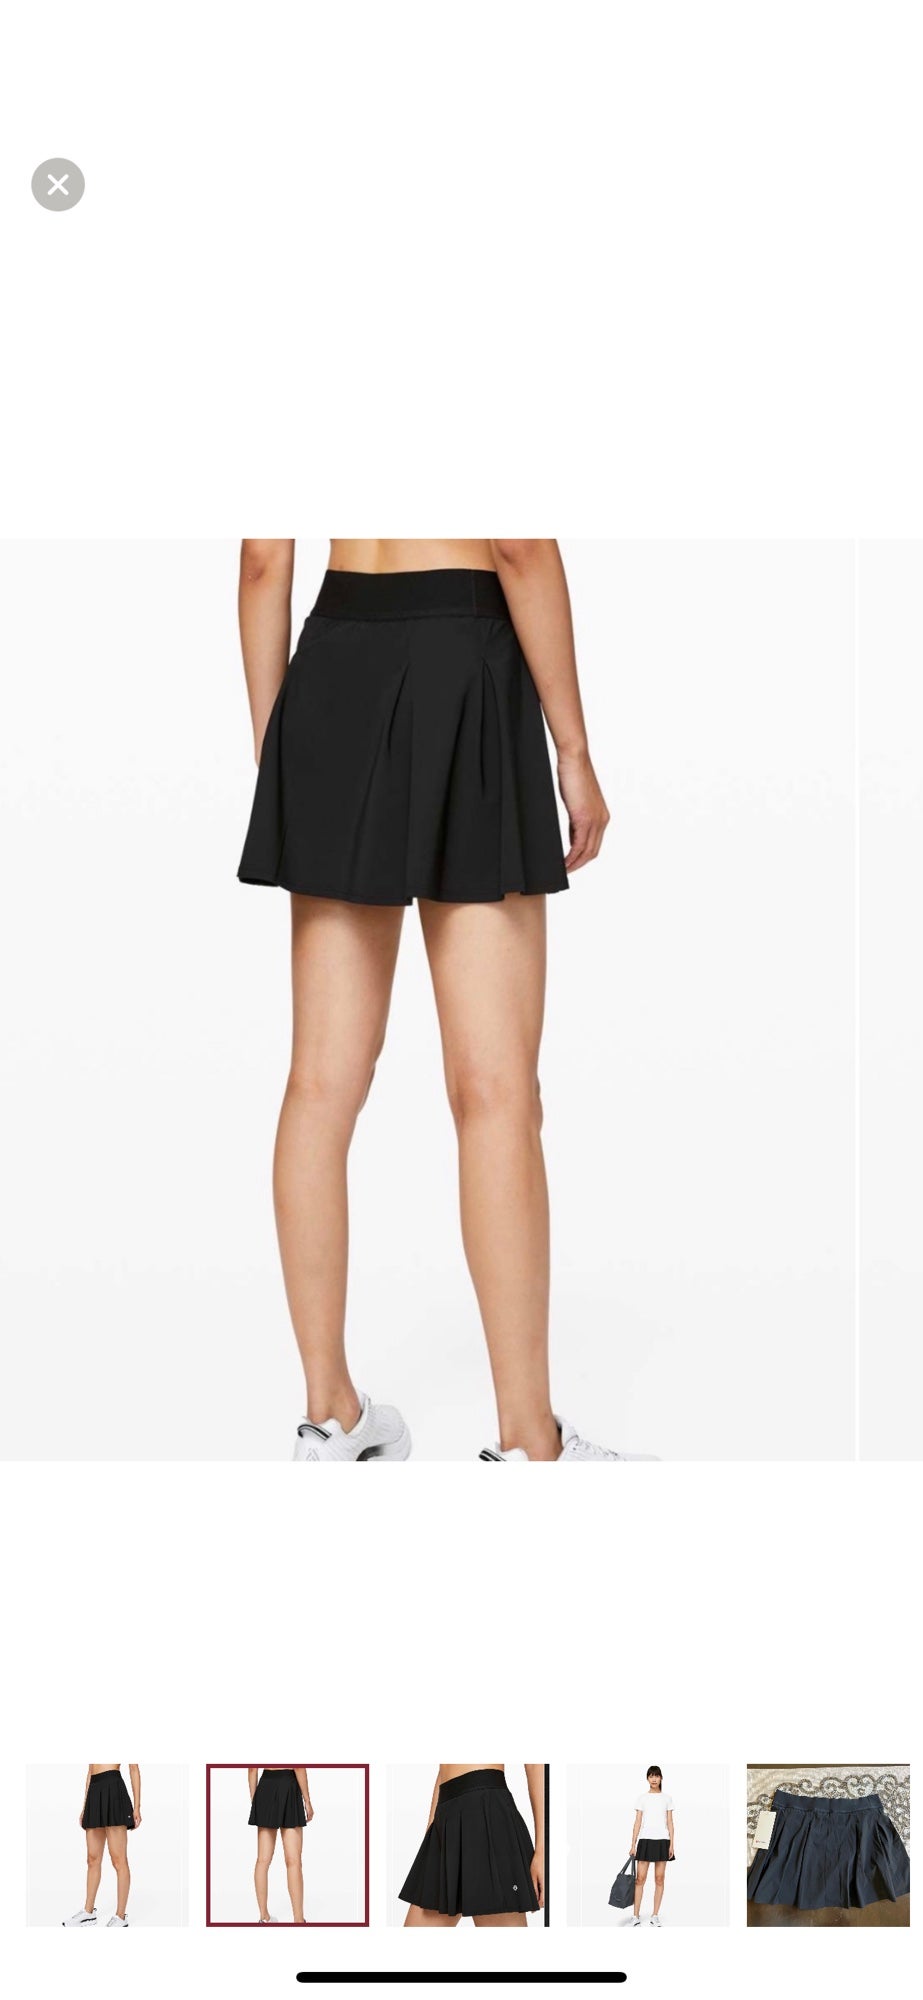 Brand new with tags!! Lululemon Tennis Time Skirt, size 4, black